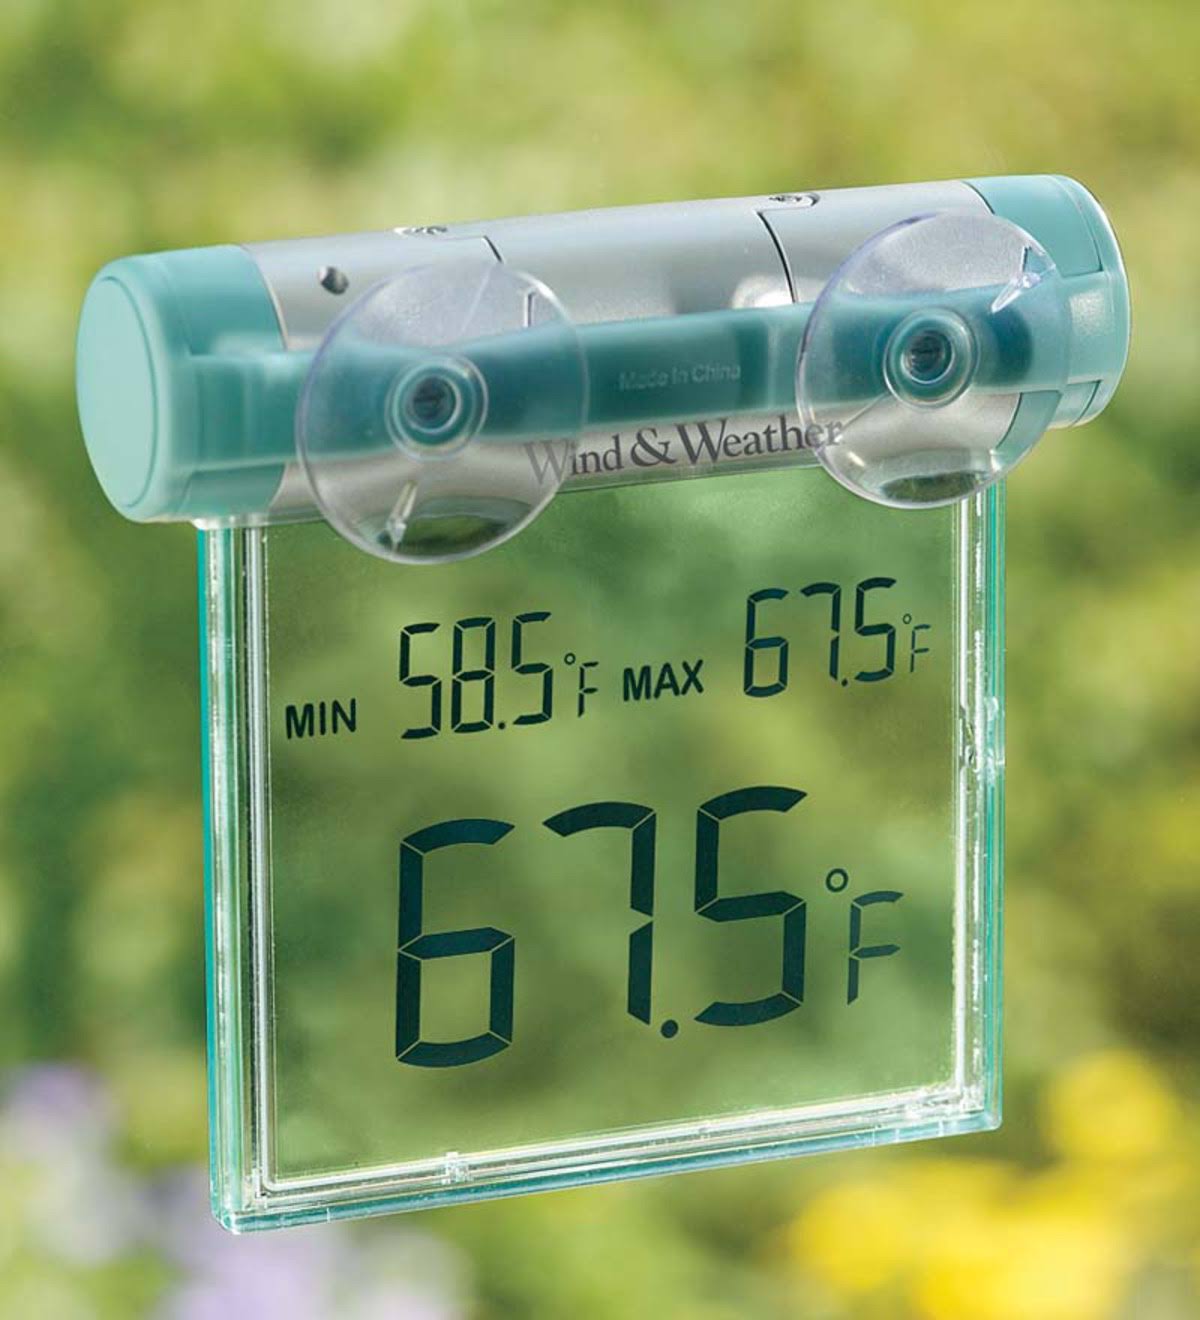 Acurite 00603a1 Digital Window Thermometer